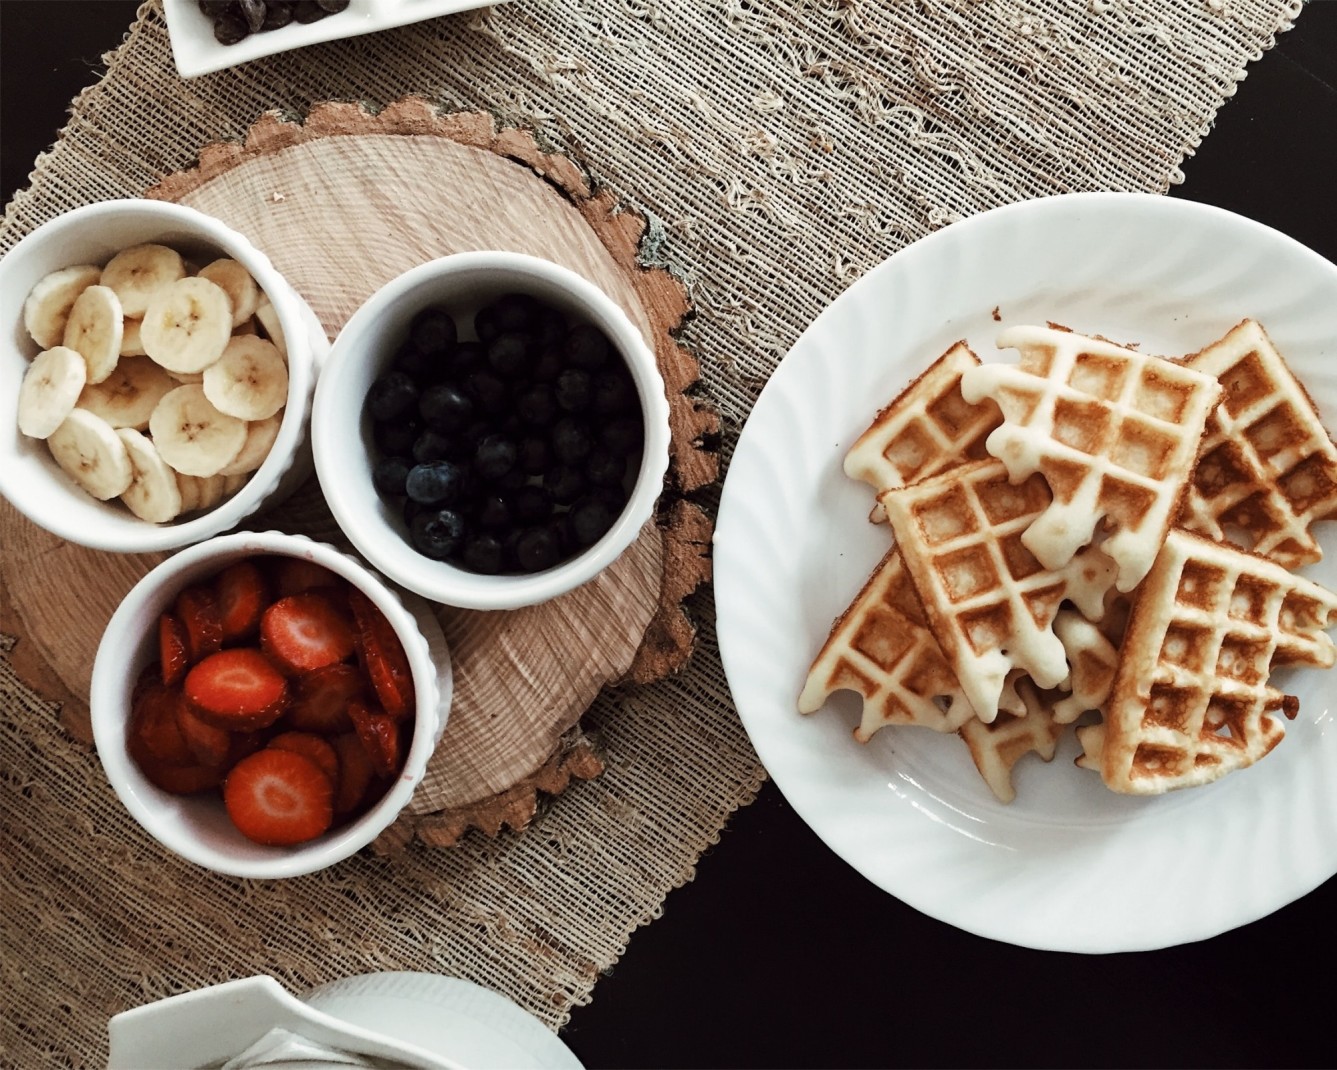 Breakfast waffles, bananas, strawberries and blueberries on a wooden table with runner. 